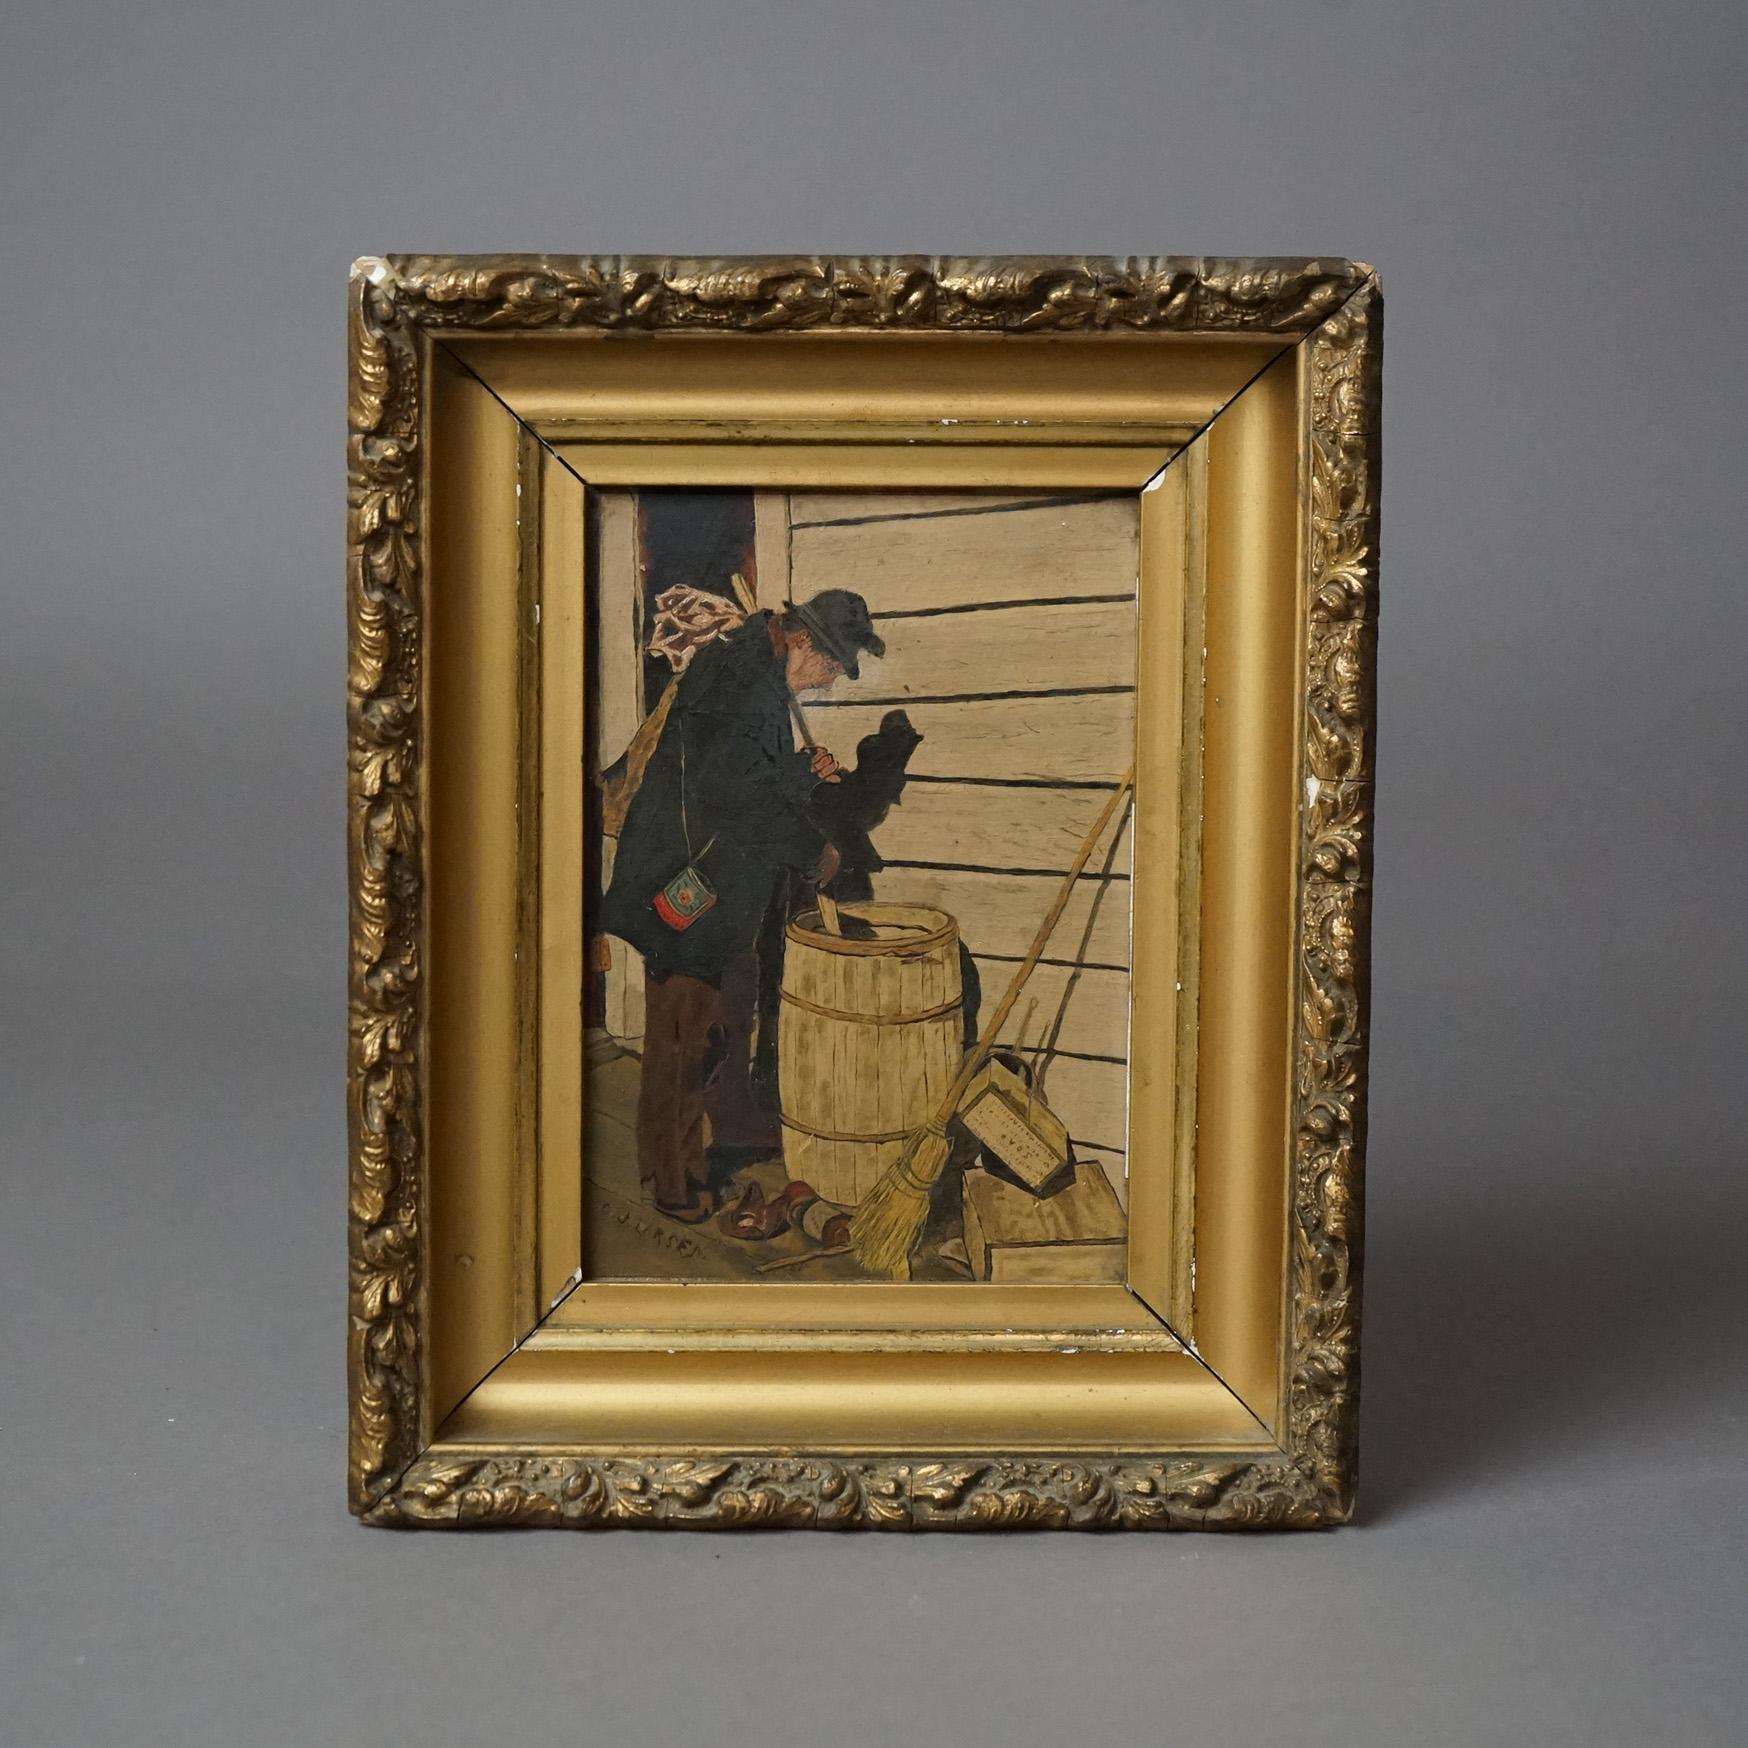 Antique Oil on Panel Painting of a Street Urchin Hobo Signed C.J. Larsen, Seated in Giltwood Frame,  C1900

Measures - 9.75